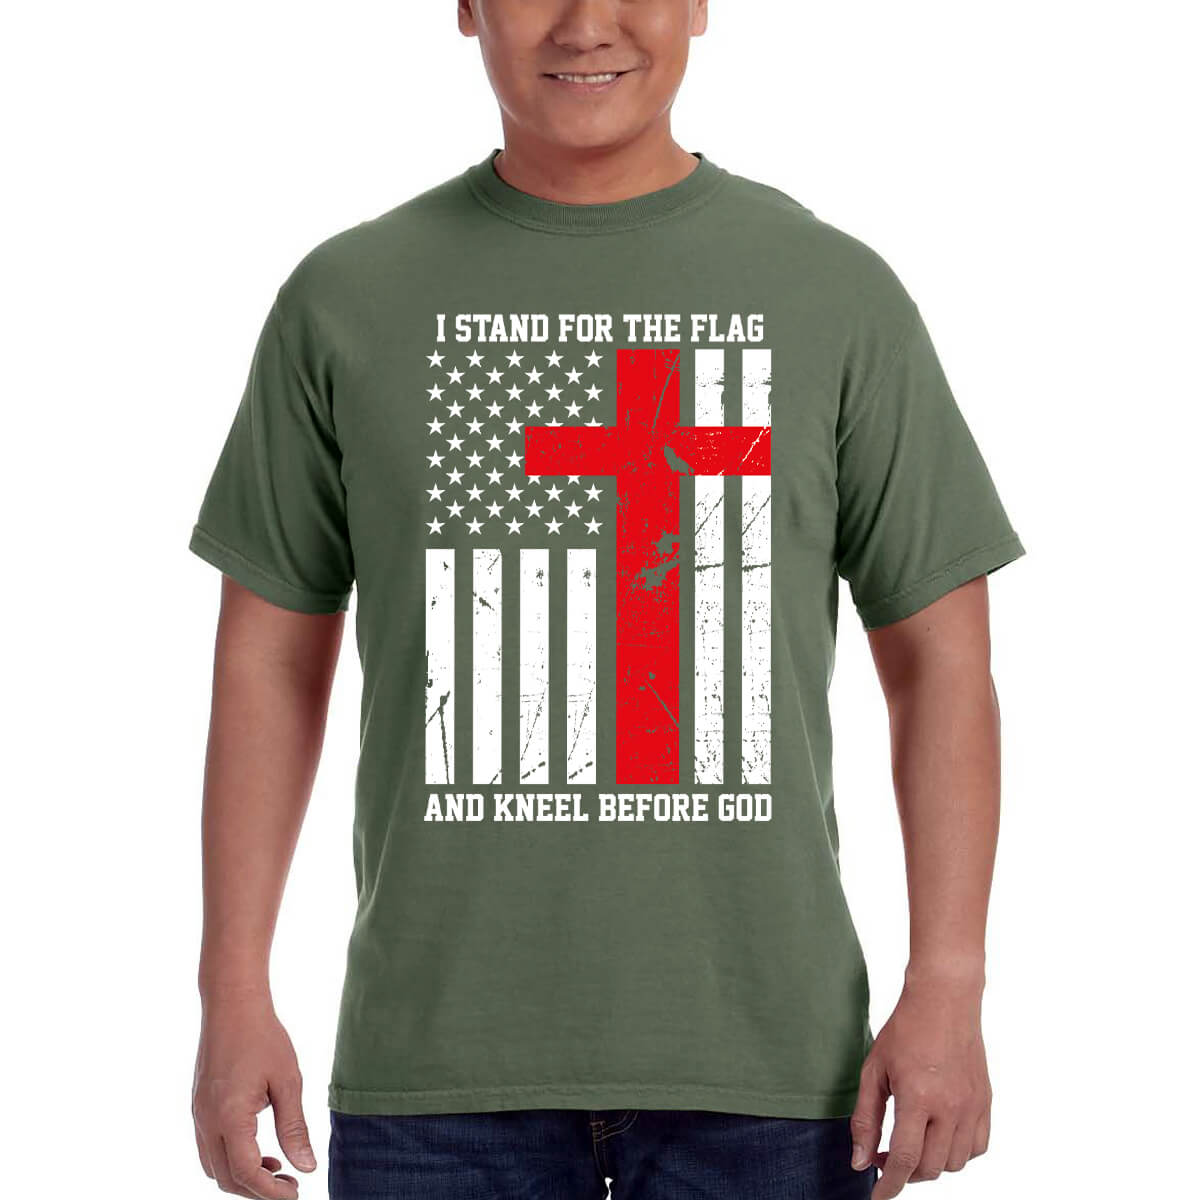 I Stand For The Flag And Kneel Before God Men's T-Shirt